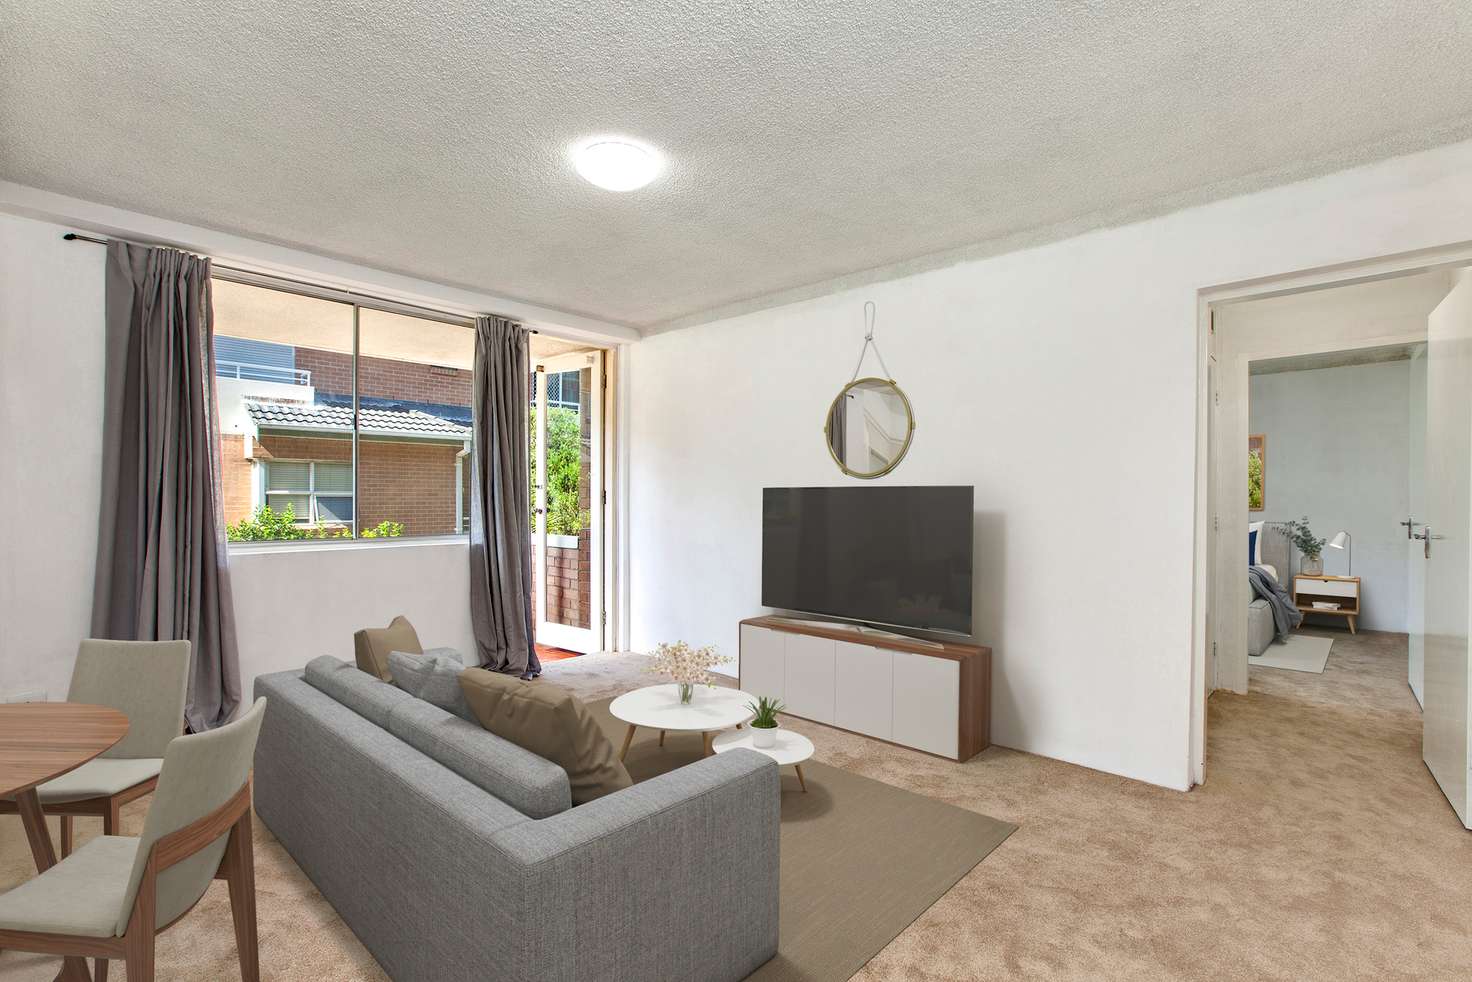 Main view of Homely apartment listing, 3/857 Anzac Parade, Maroubra NSW 2035